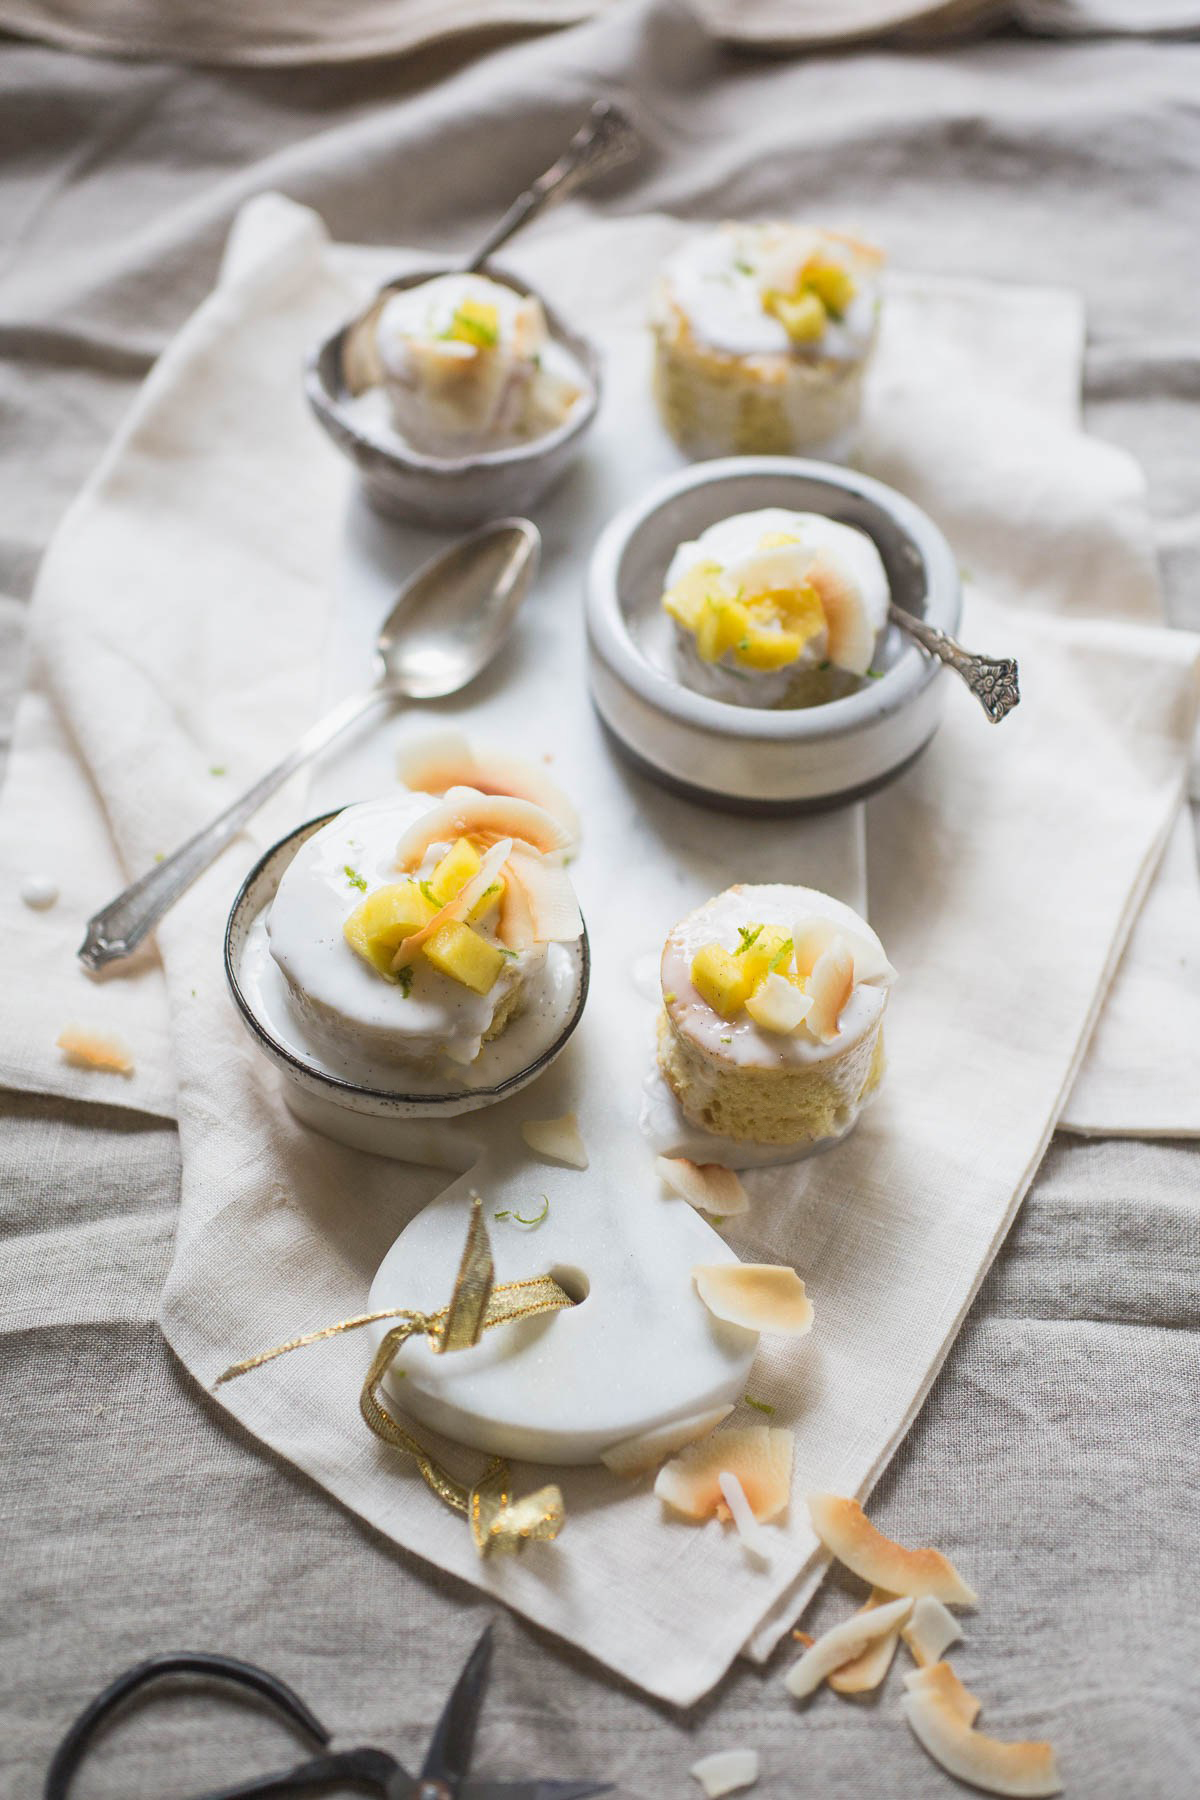 Triple Coconut "Tres Leches" Cake With Mango & Lime